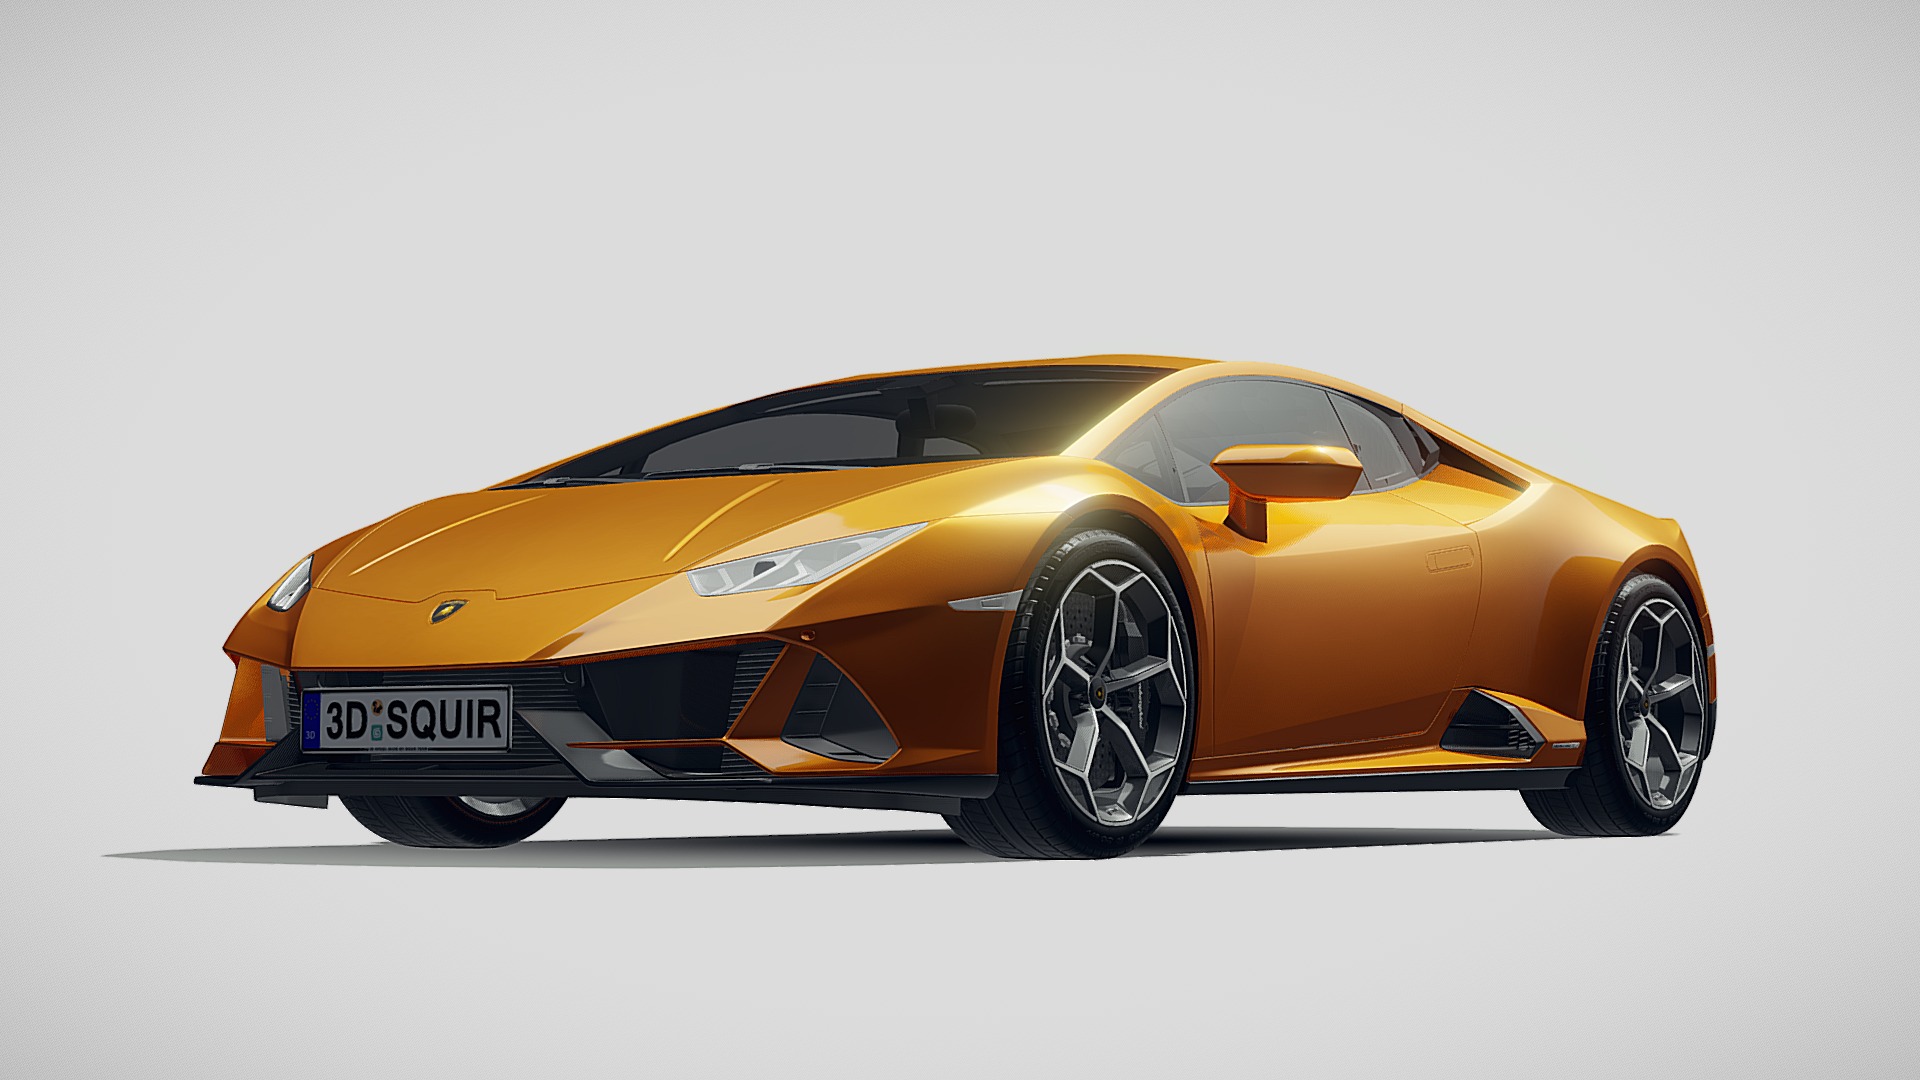 3D model Lamborghini Huracan Evo 2019 - This is a 3D model of the Lamborghini Huracan Evo 2019. The 3D model is about a yellow sports car.